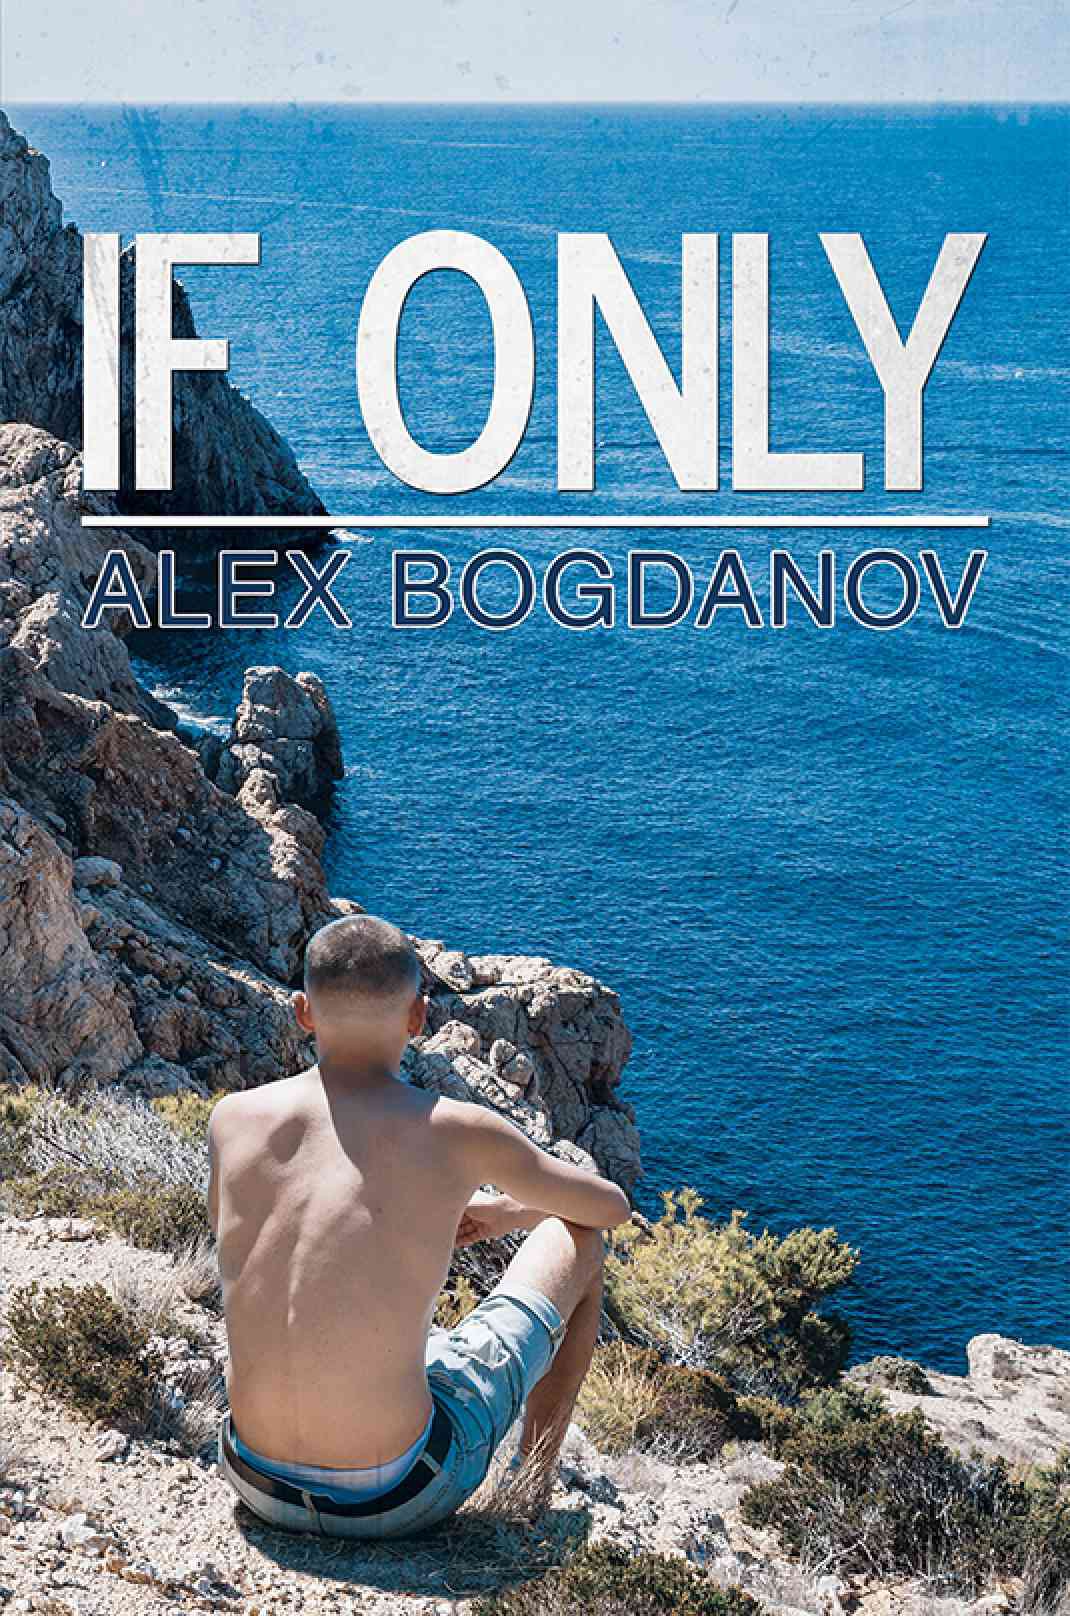 Cleverly Written ‘If Only’ receives praise in review